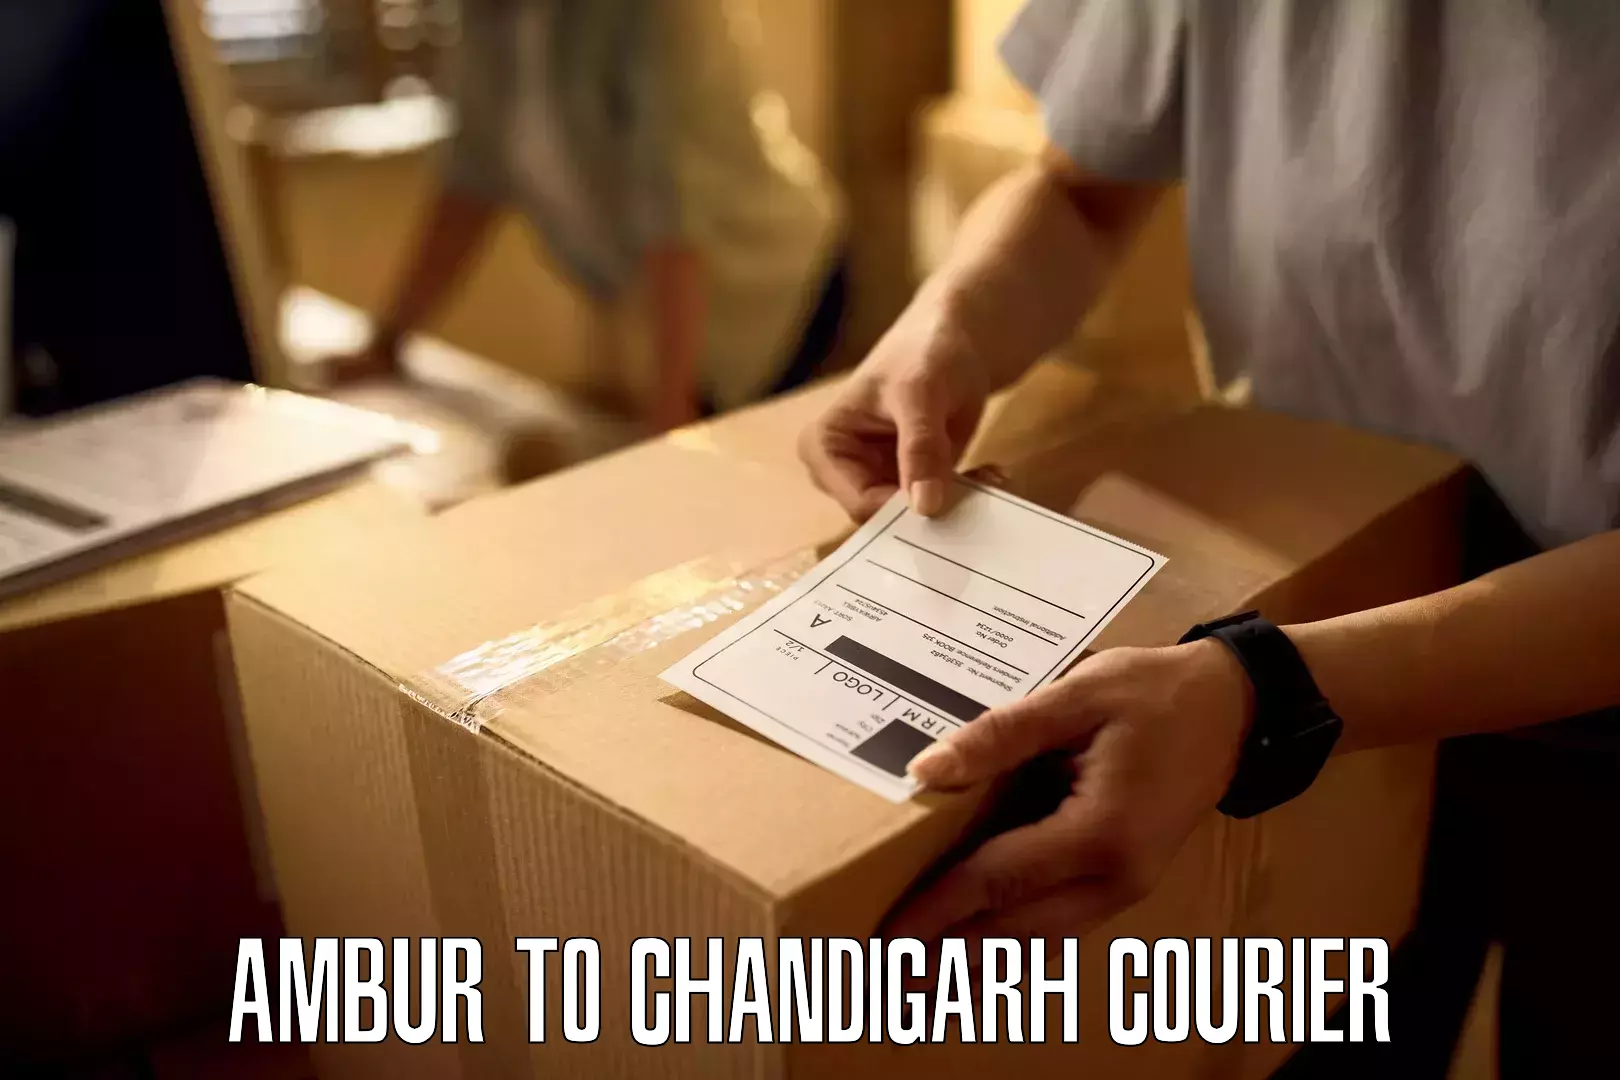 Residential courier service Ambur to Chandigarh